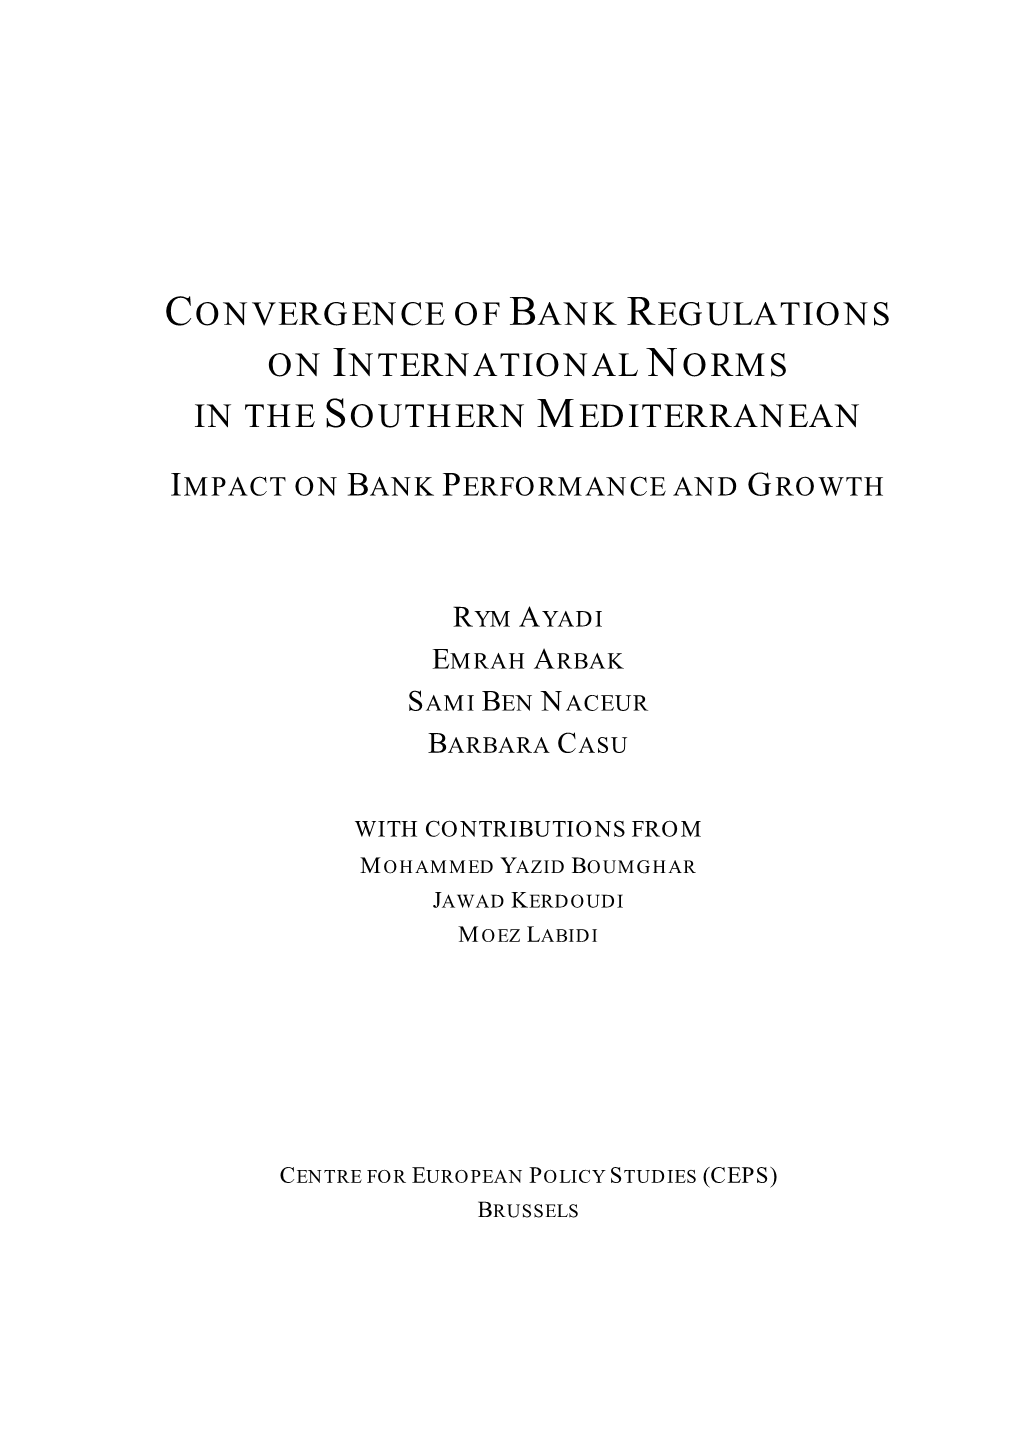 Convergence of Bank Regulations on International Norms in the Southern Mediterranean